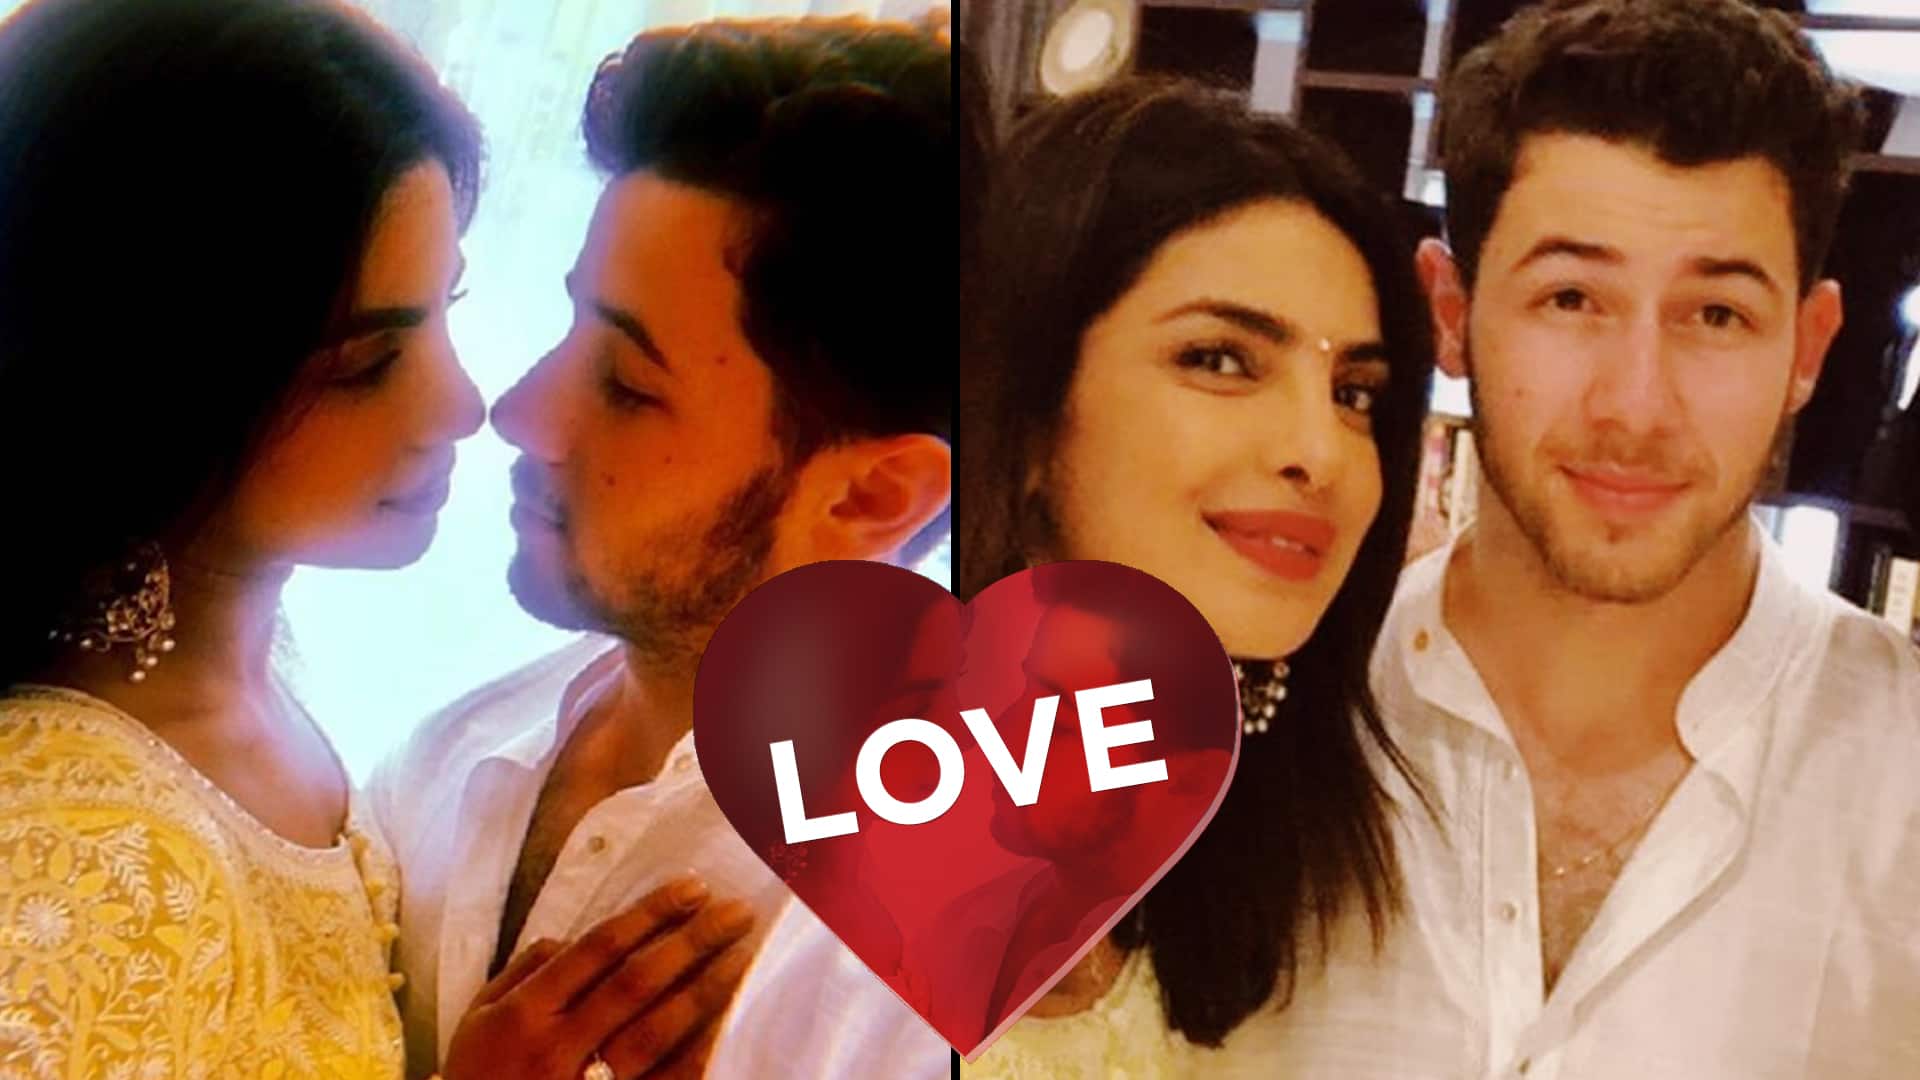 PRIYANKA NICK WEDDING DESTINATION HAS BEEN FIXED ,SEE WHERE THEY GOING TO MARRY